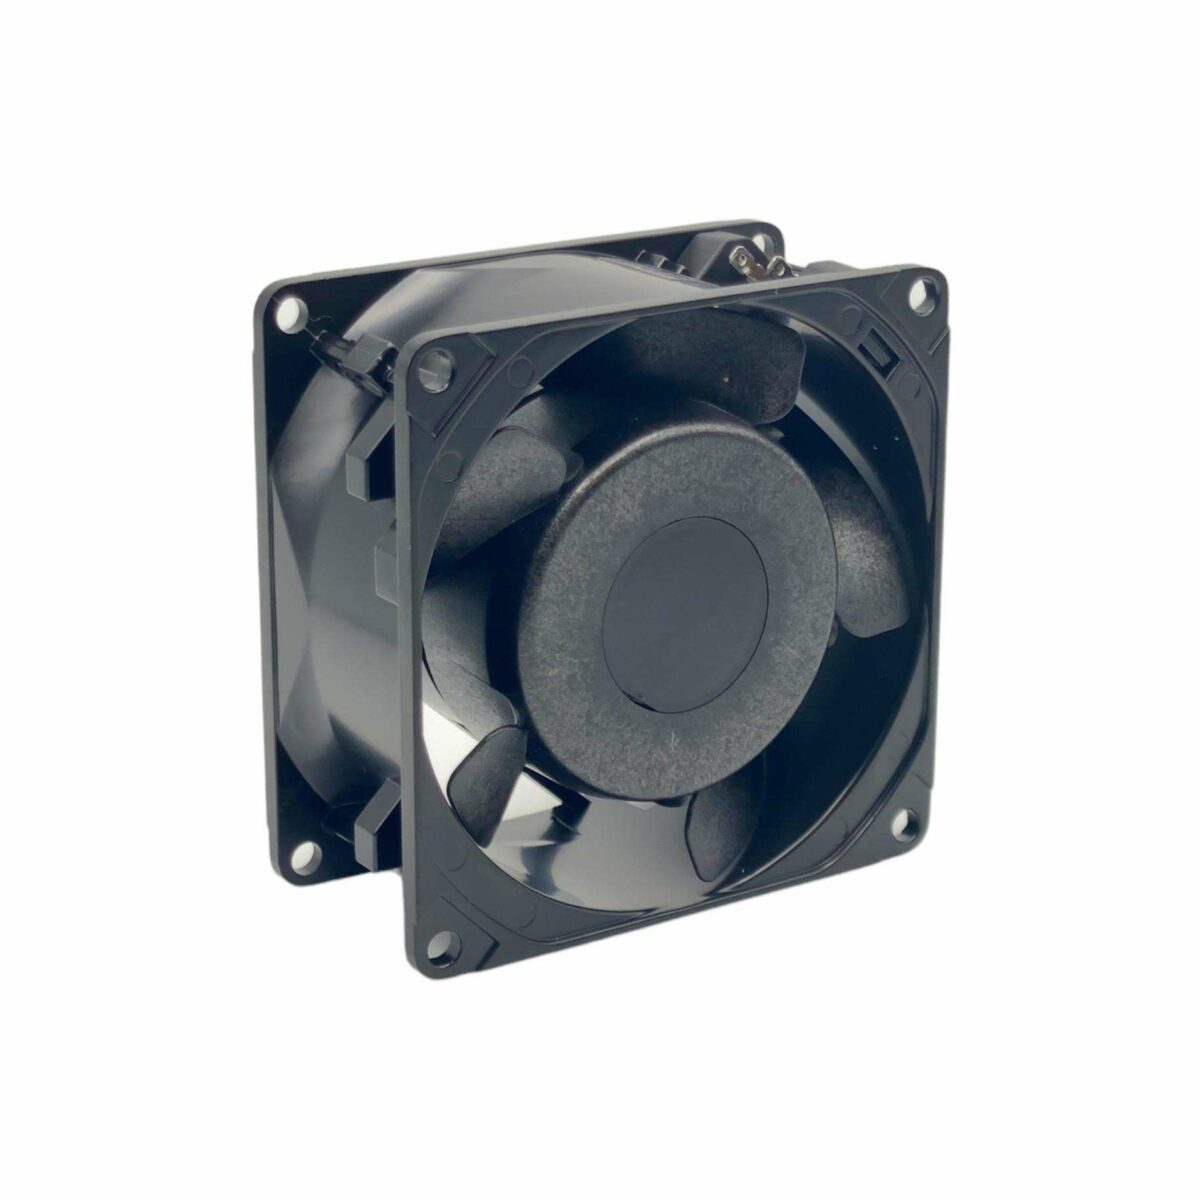 Photo of QSC MX700, MX1500 Replacement Cooling Fan at Analog Classics